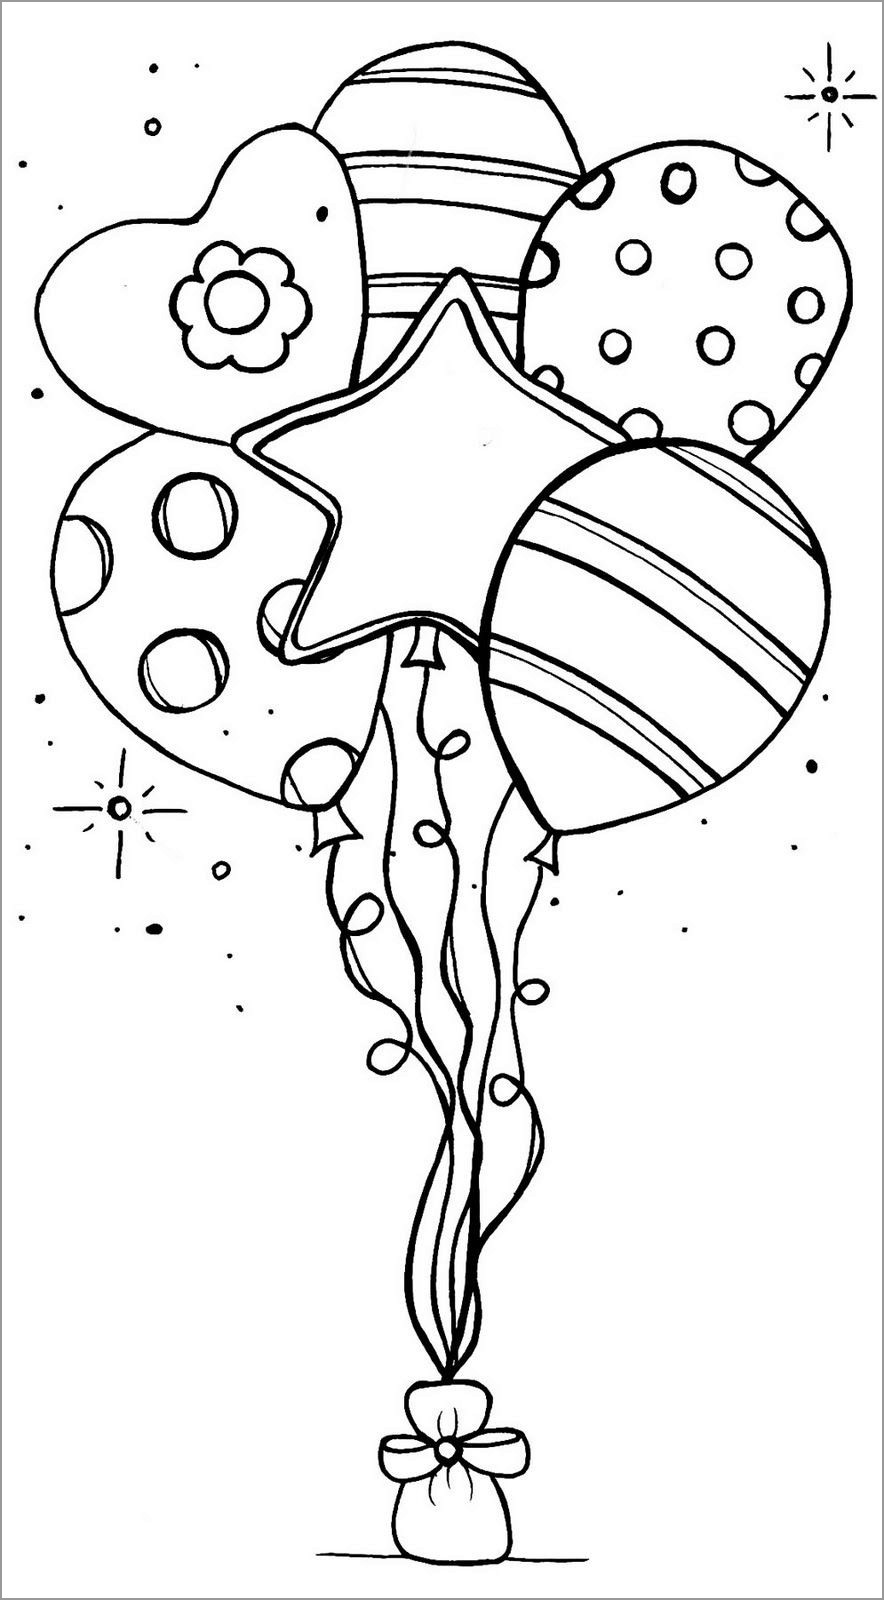 Balloon Coloring Pages - ColoringBay